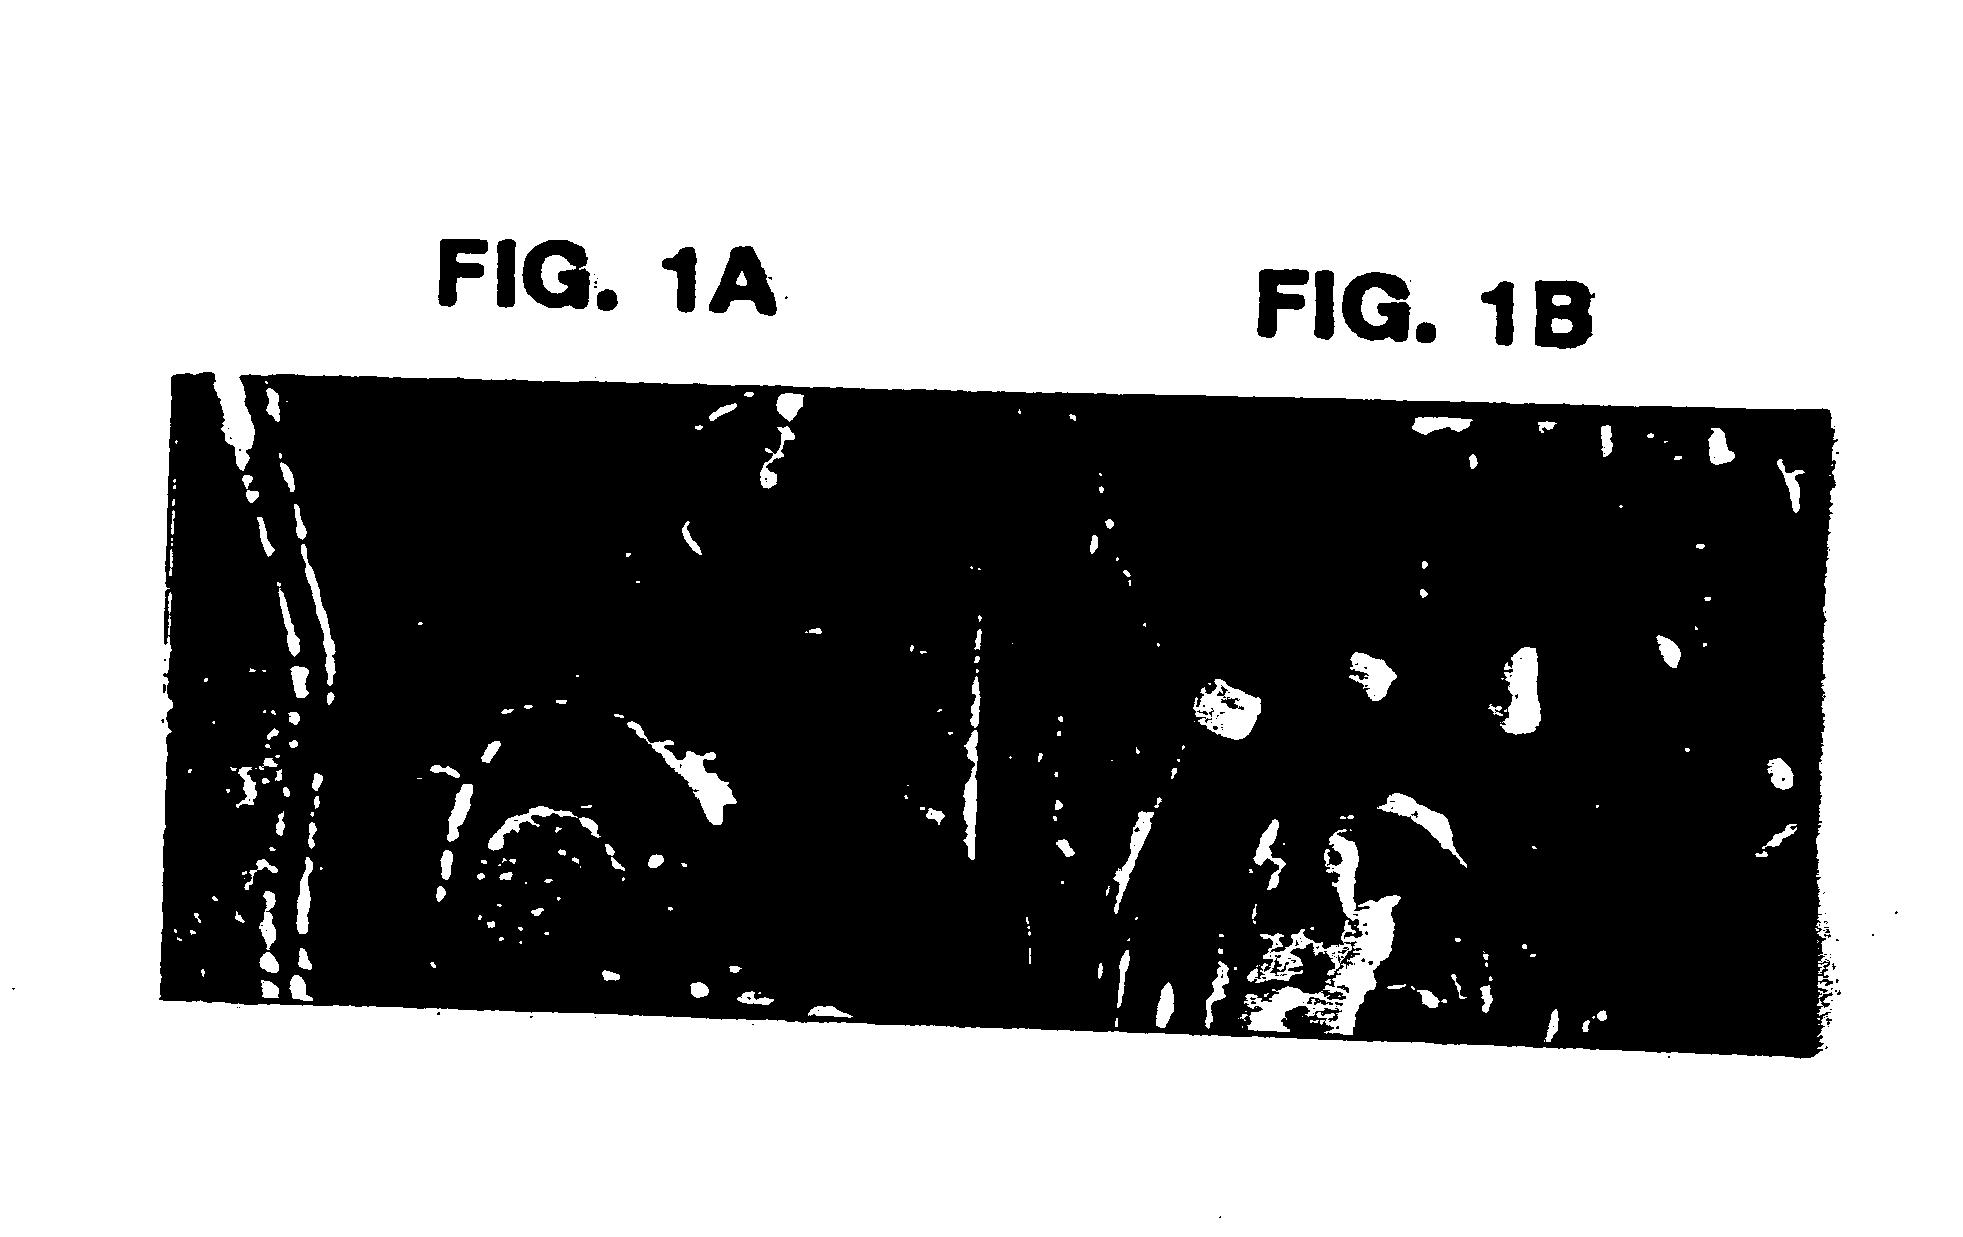 Method to prevent accelerated atherosclerosis using (sRAGE) soluble receptor for advanced glycation endproducts